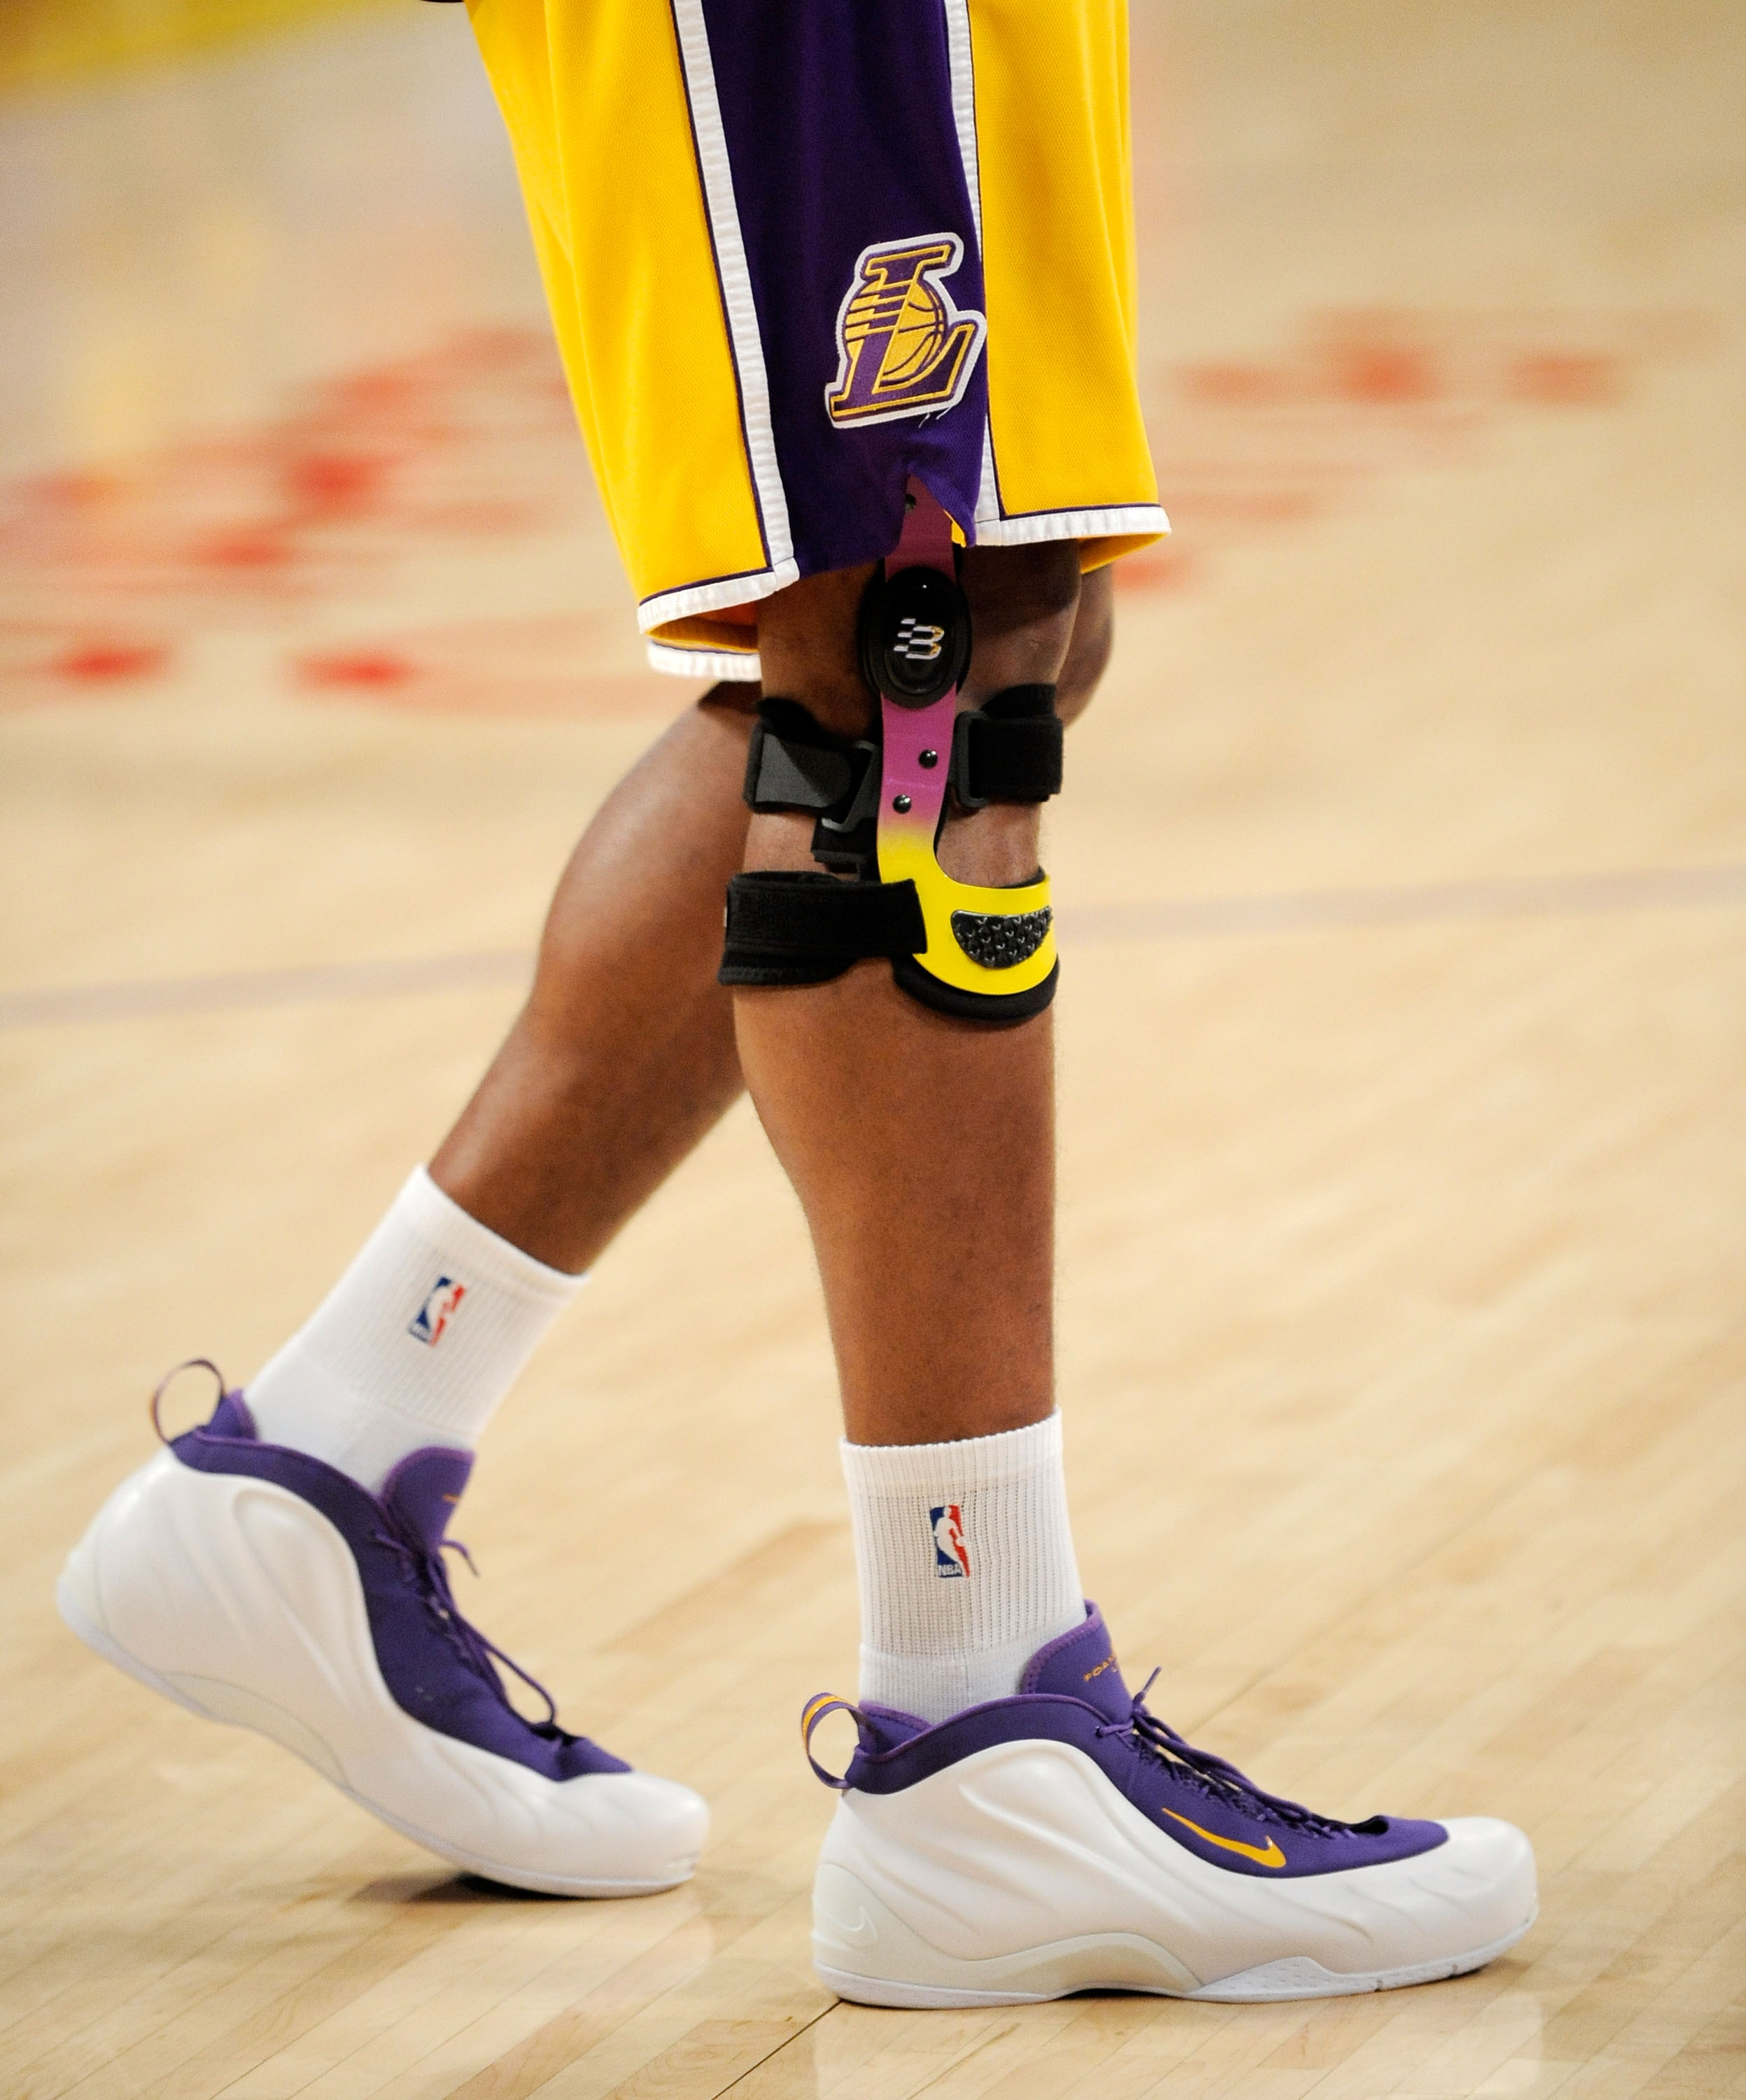 LOS ANGELES, CA - APRIL 9:  Andrew Bynum #17 of the Los Angeles Lakers wears a knee brace as he warms up before the start of the game against the Denver Nuggets, his first game back after suffering a torn medial collateral ligament in his right knee on Ja